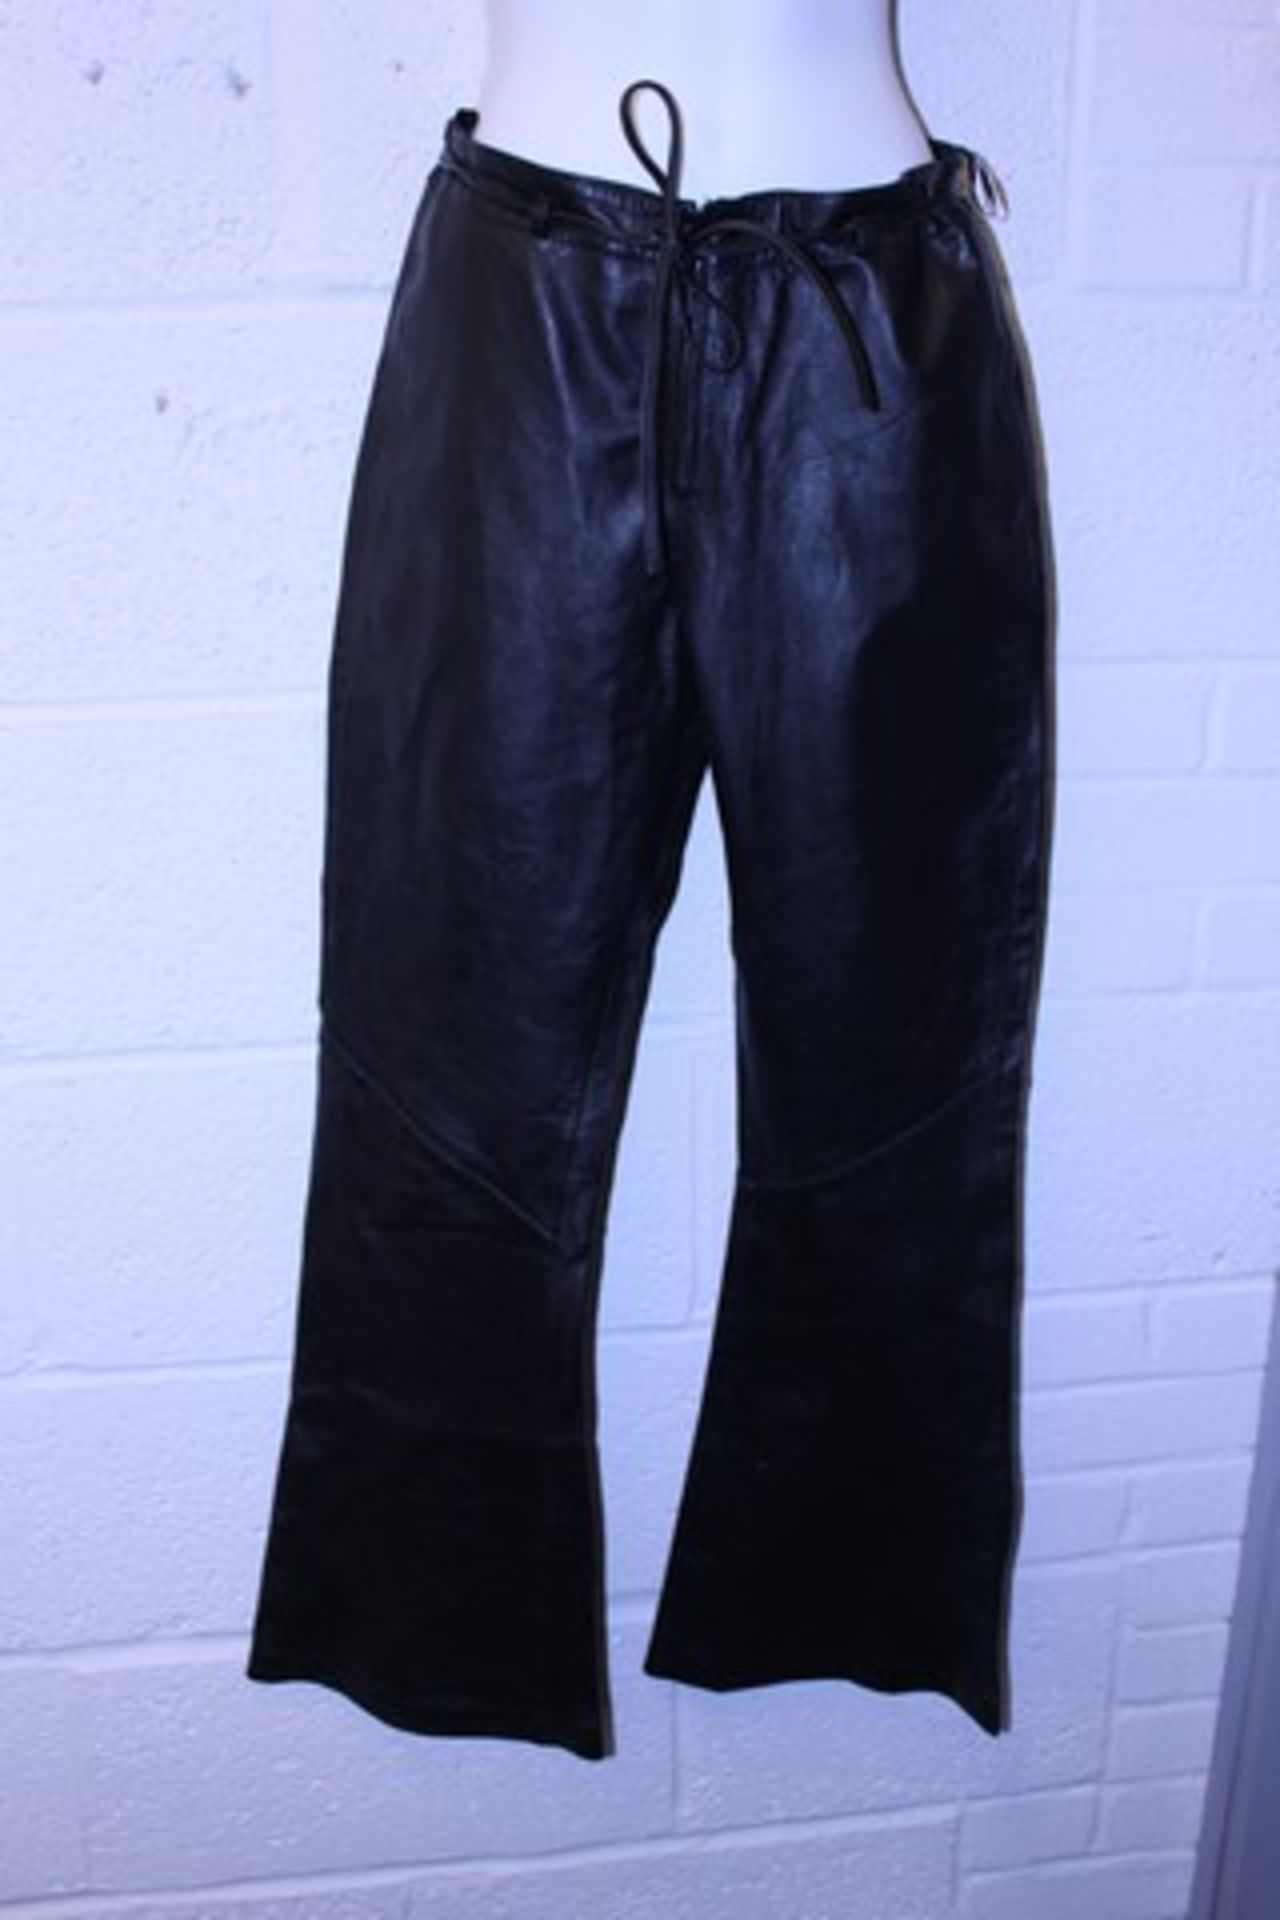 Grade U Pair Ladies Outer Edge Black Leather Trousers Size 12